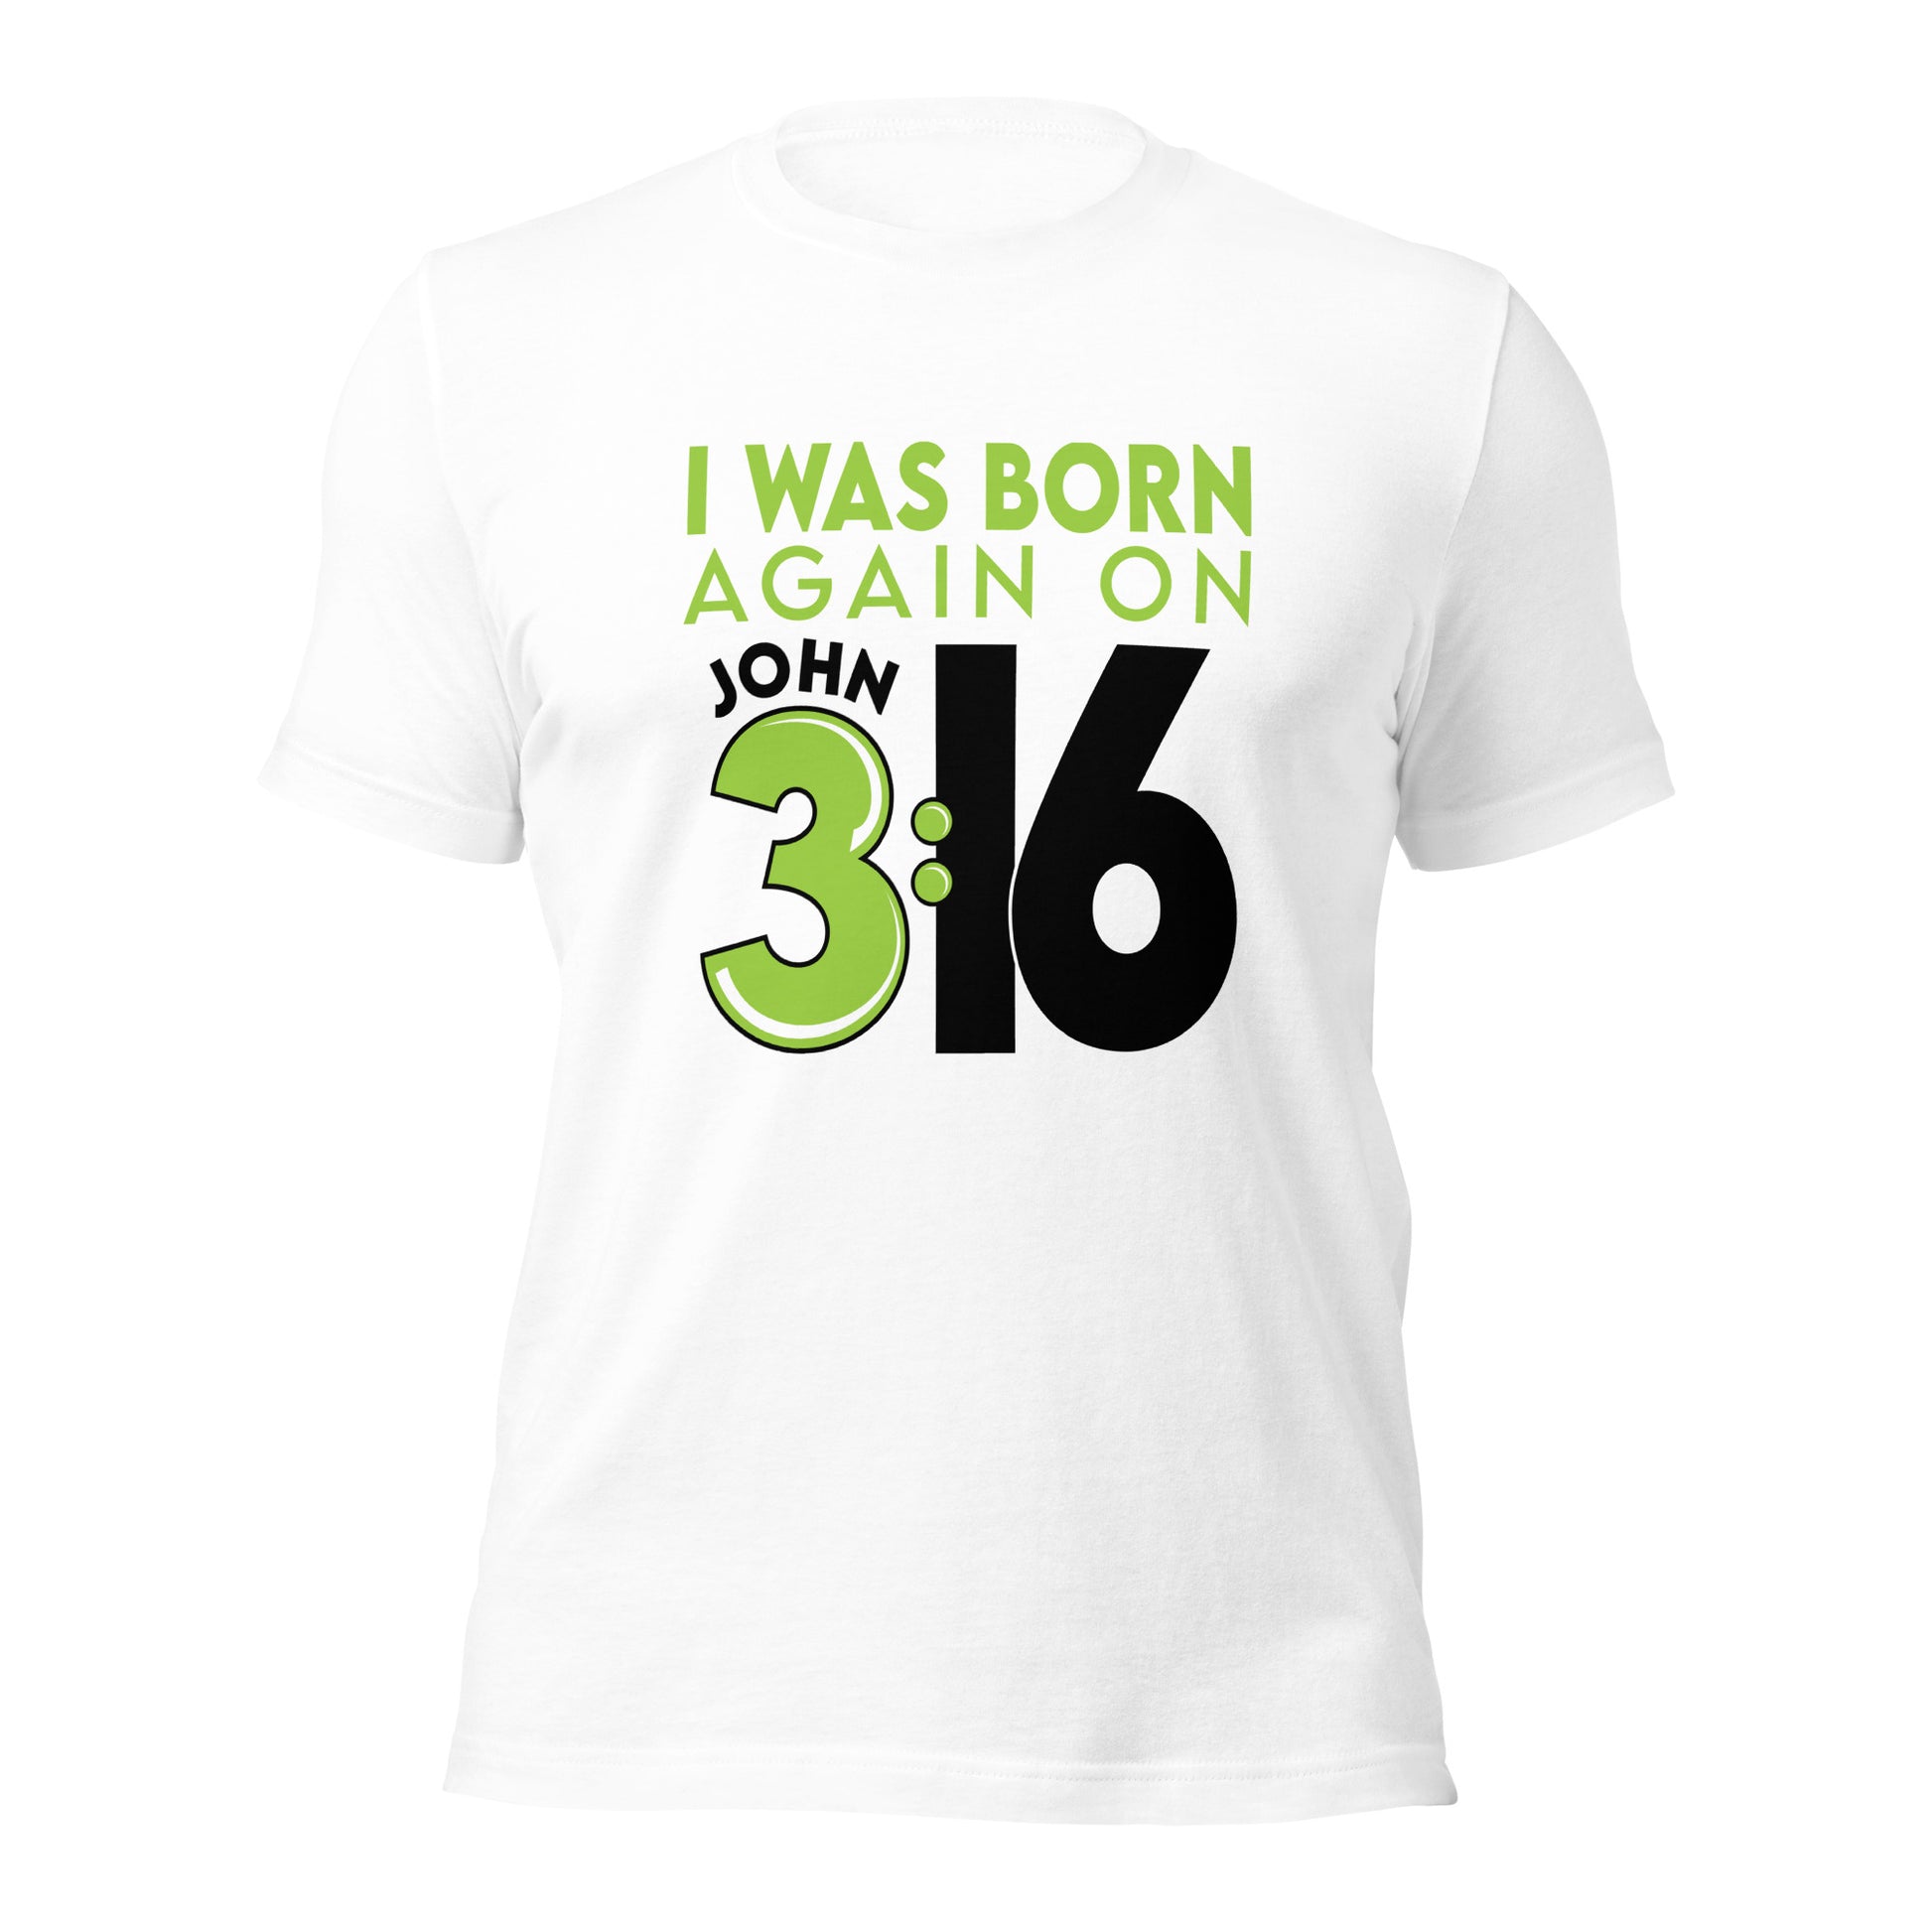 White Christian aesthetic unisex t-shirt with a play on words that says, I Was Born Again on John 3:16, bible verse scripture quote in lime green and black, designed for men and women